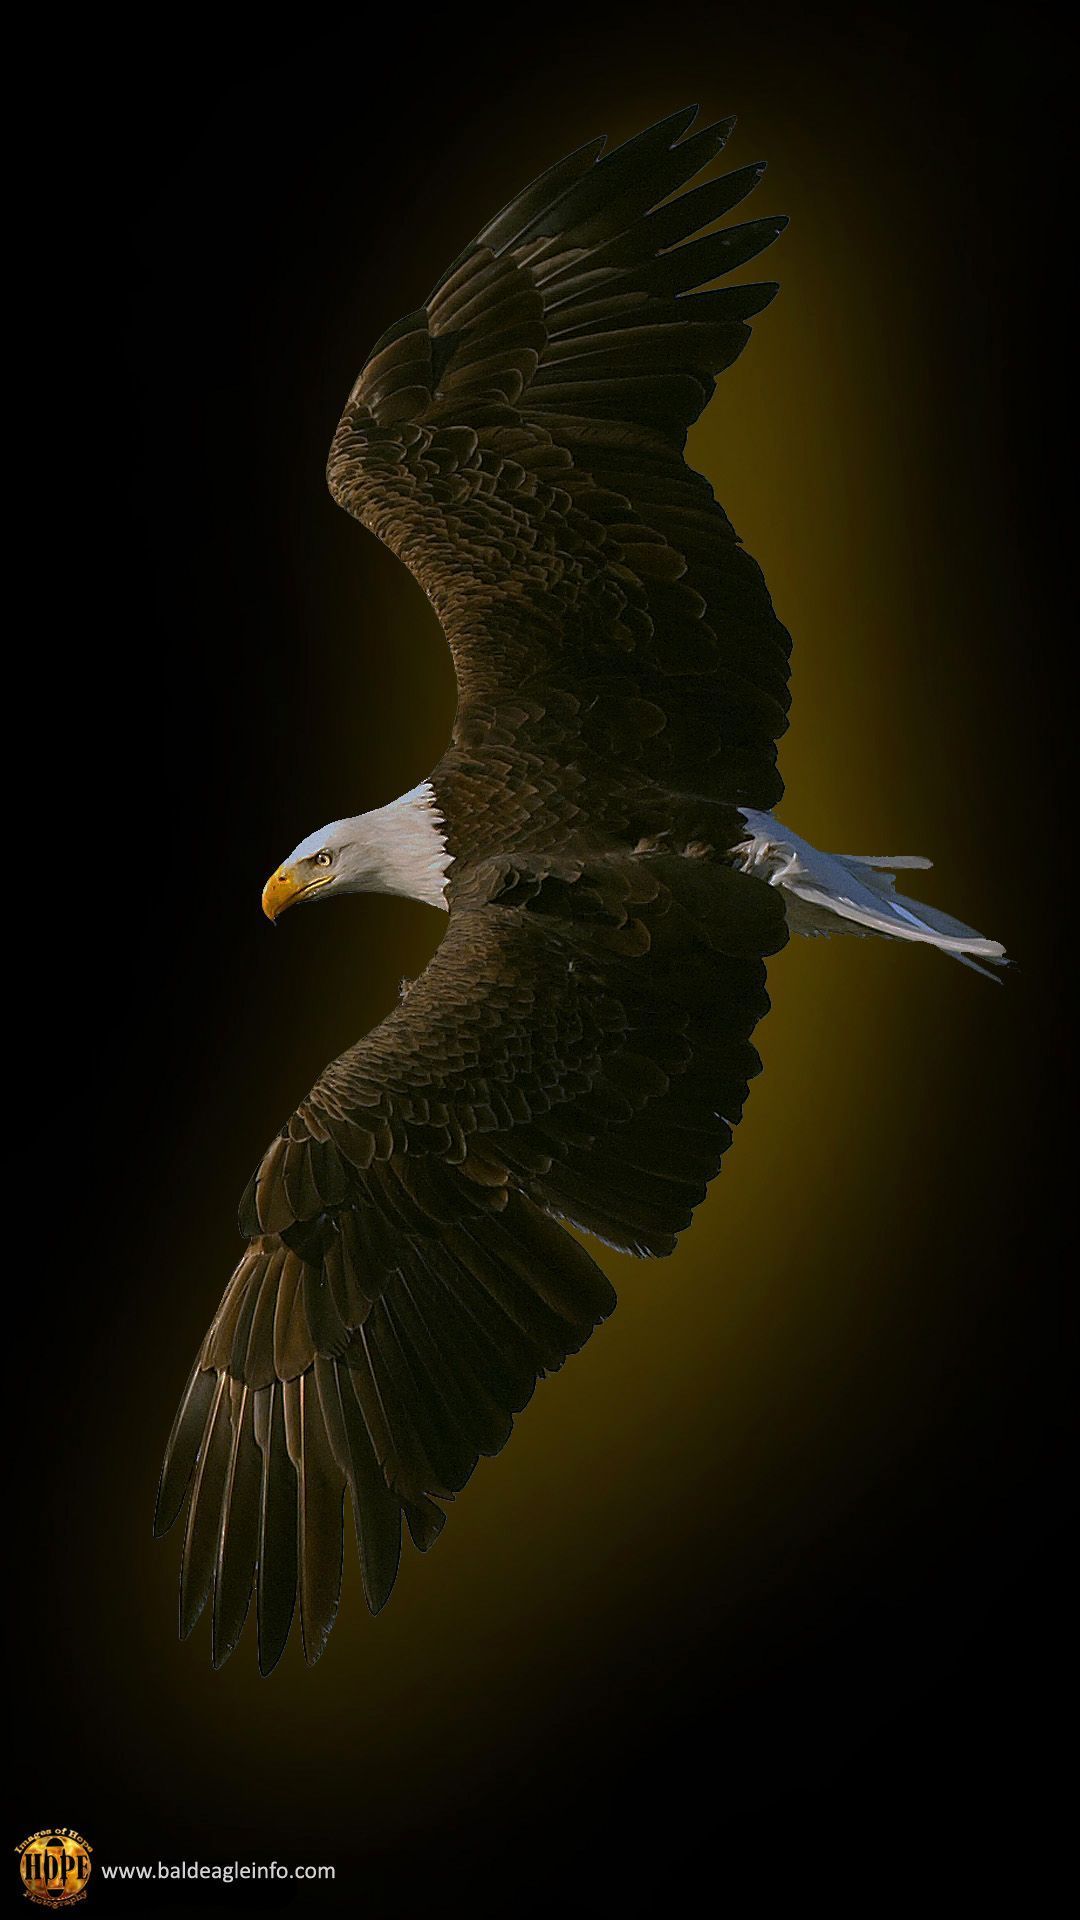 Iphone Eagle Wallpapers